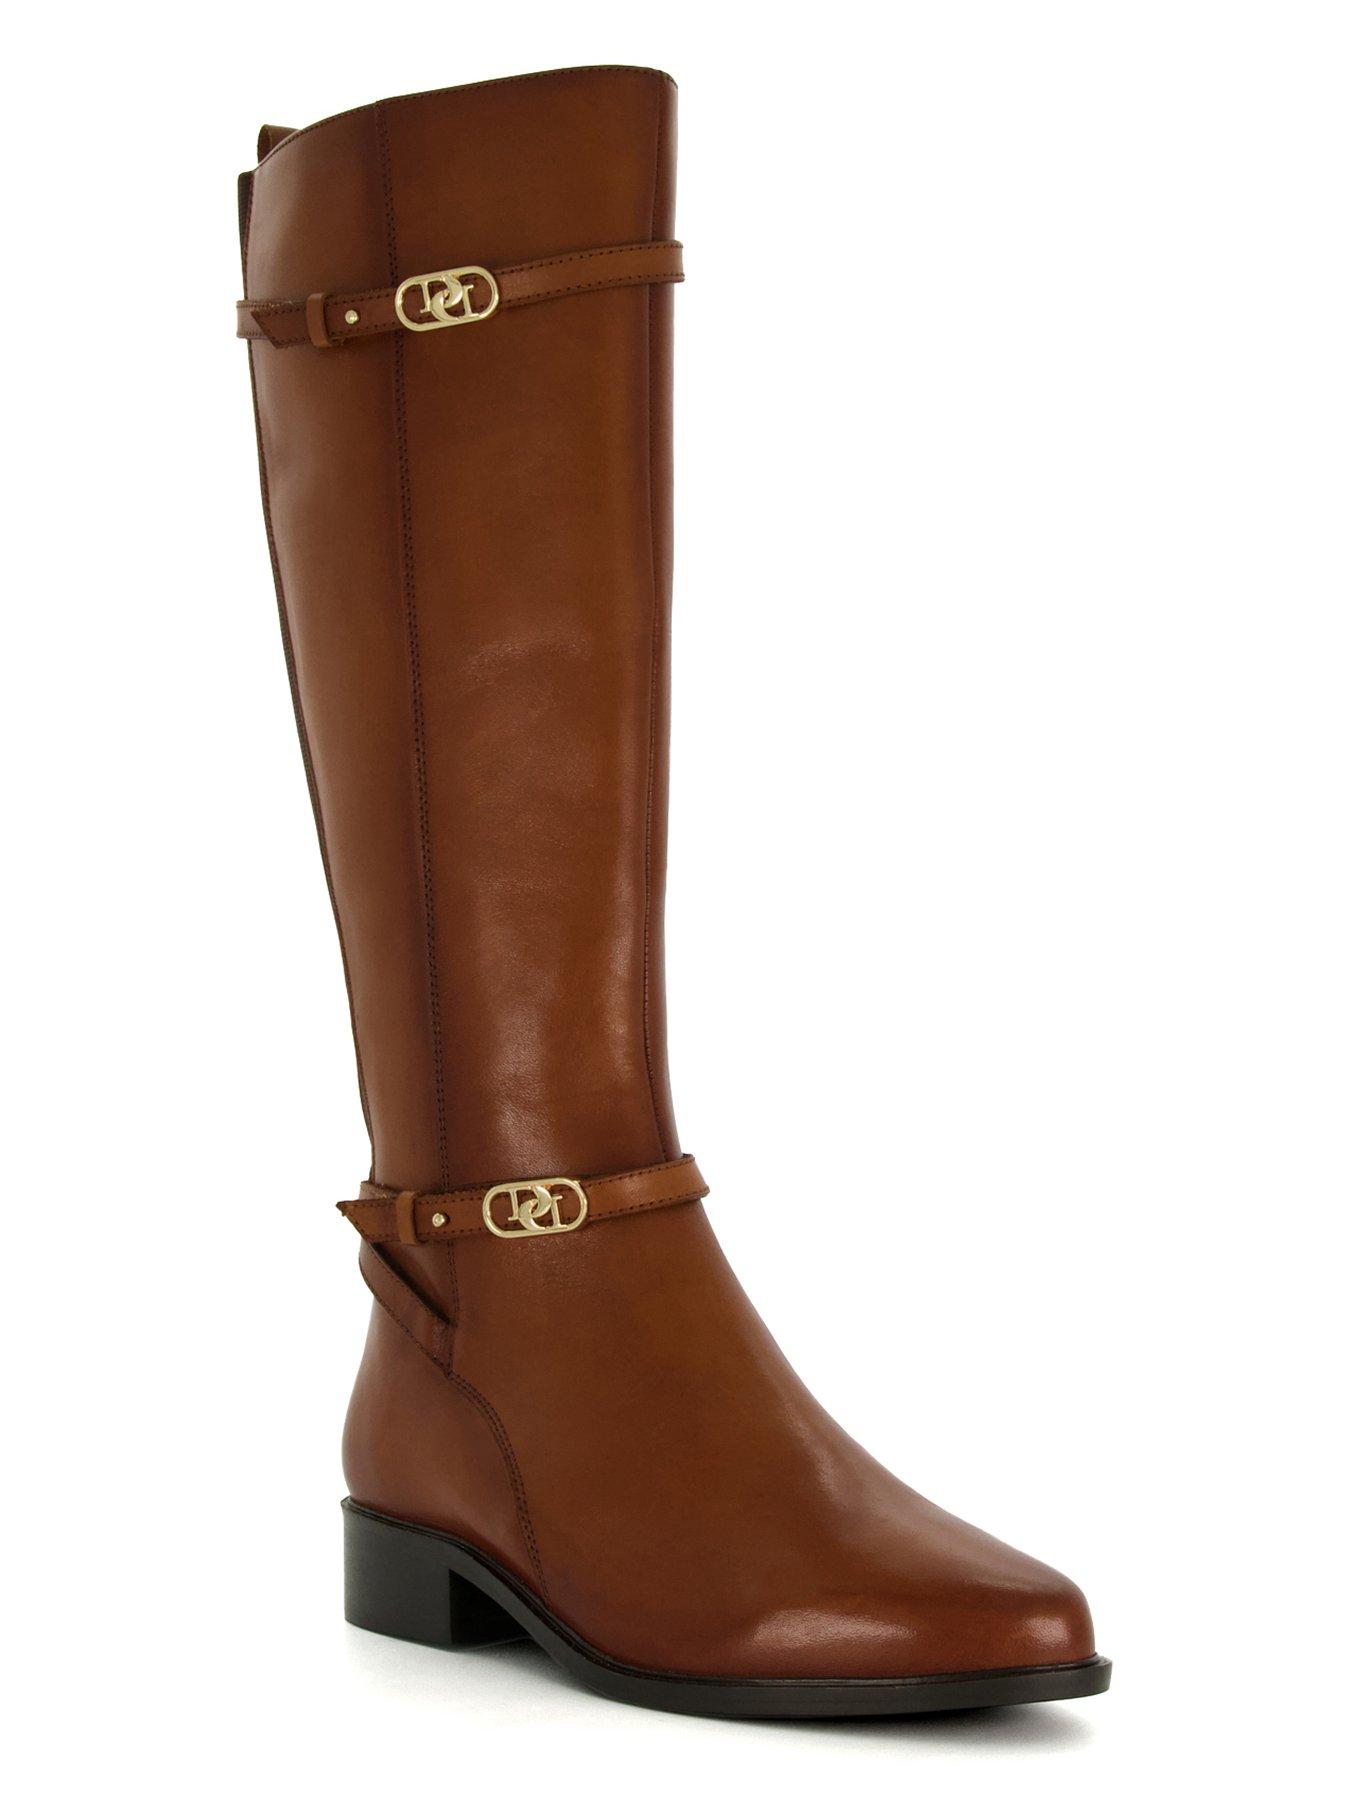 Dune London Dune Tup Leather Knee High Riding Boots - Tan | very.co.uk